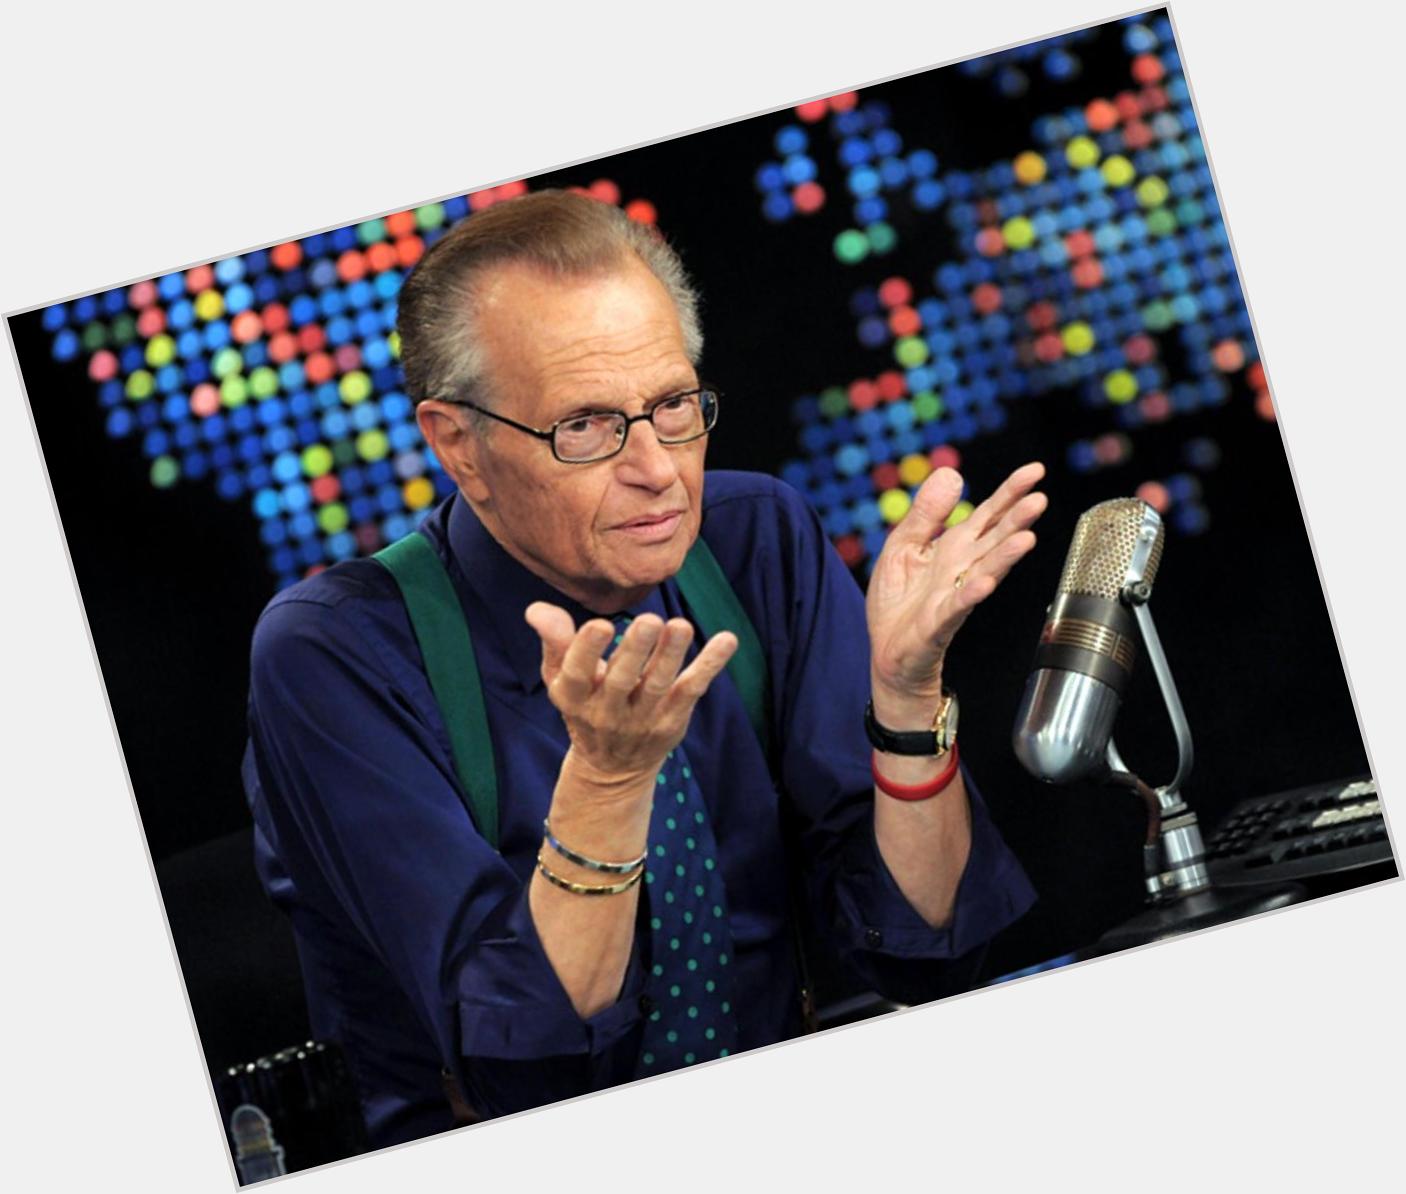 Larry King was a true Leader 1 as a trailblazer in the news industry. Happy birthday!  